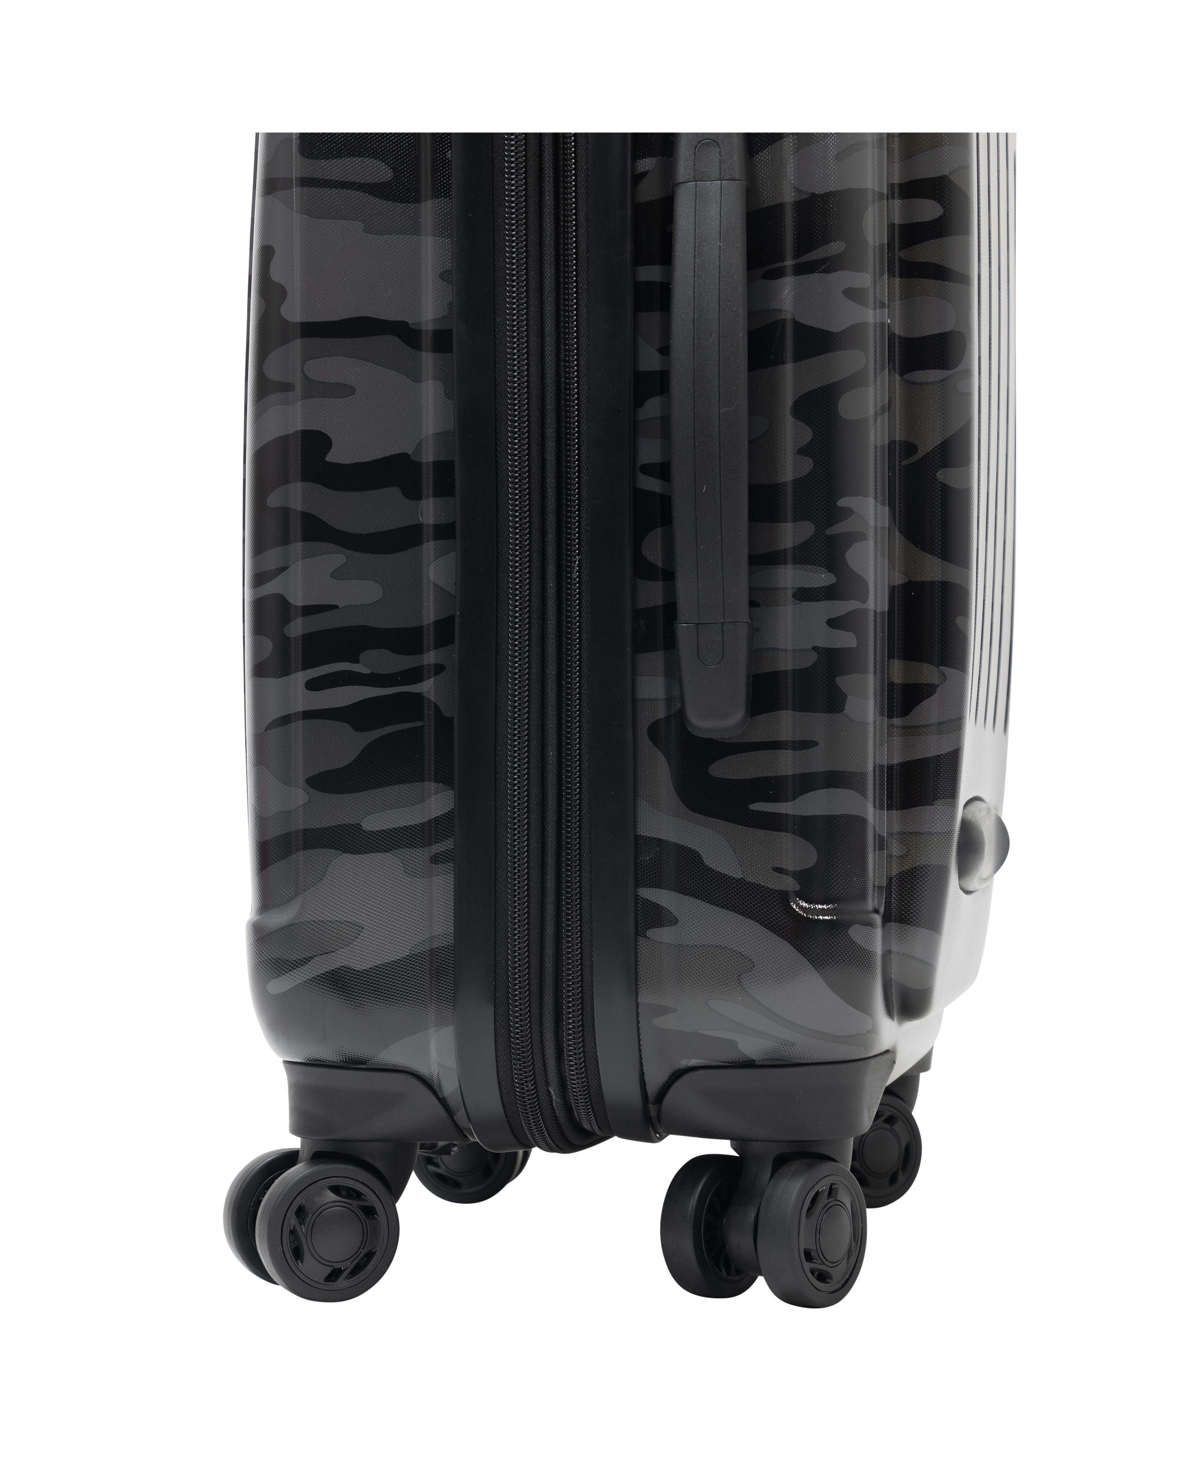 Shop Kenneth Cole Reaction Renegade Camo 28" Hardside Expandable Luggage In Camo Black